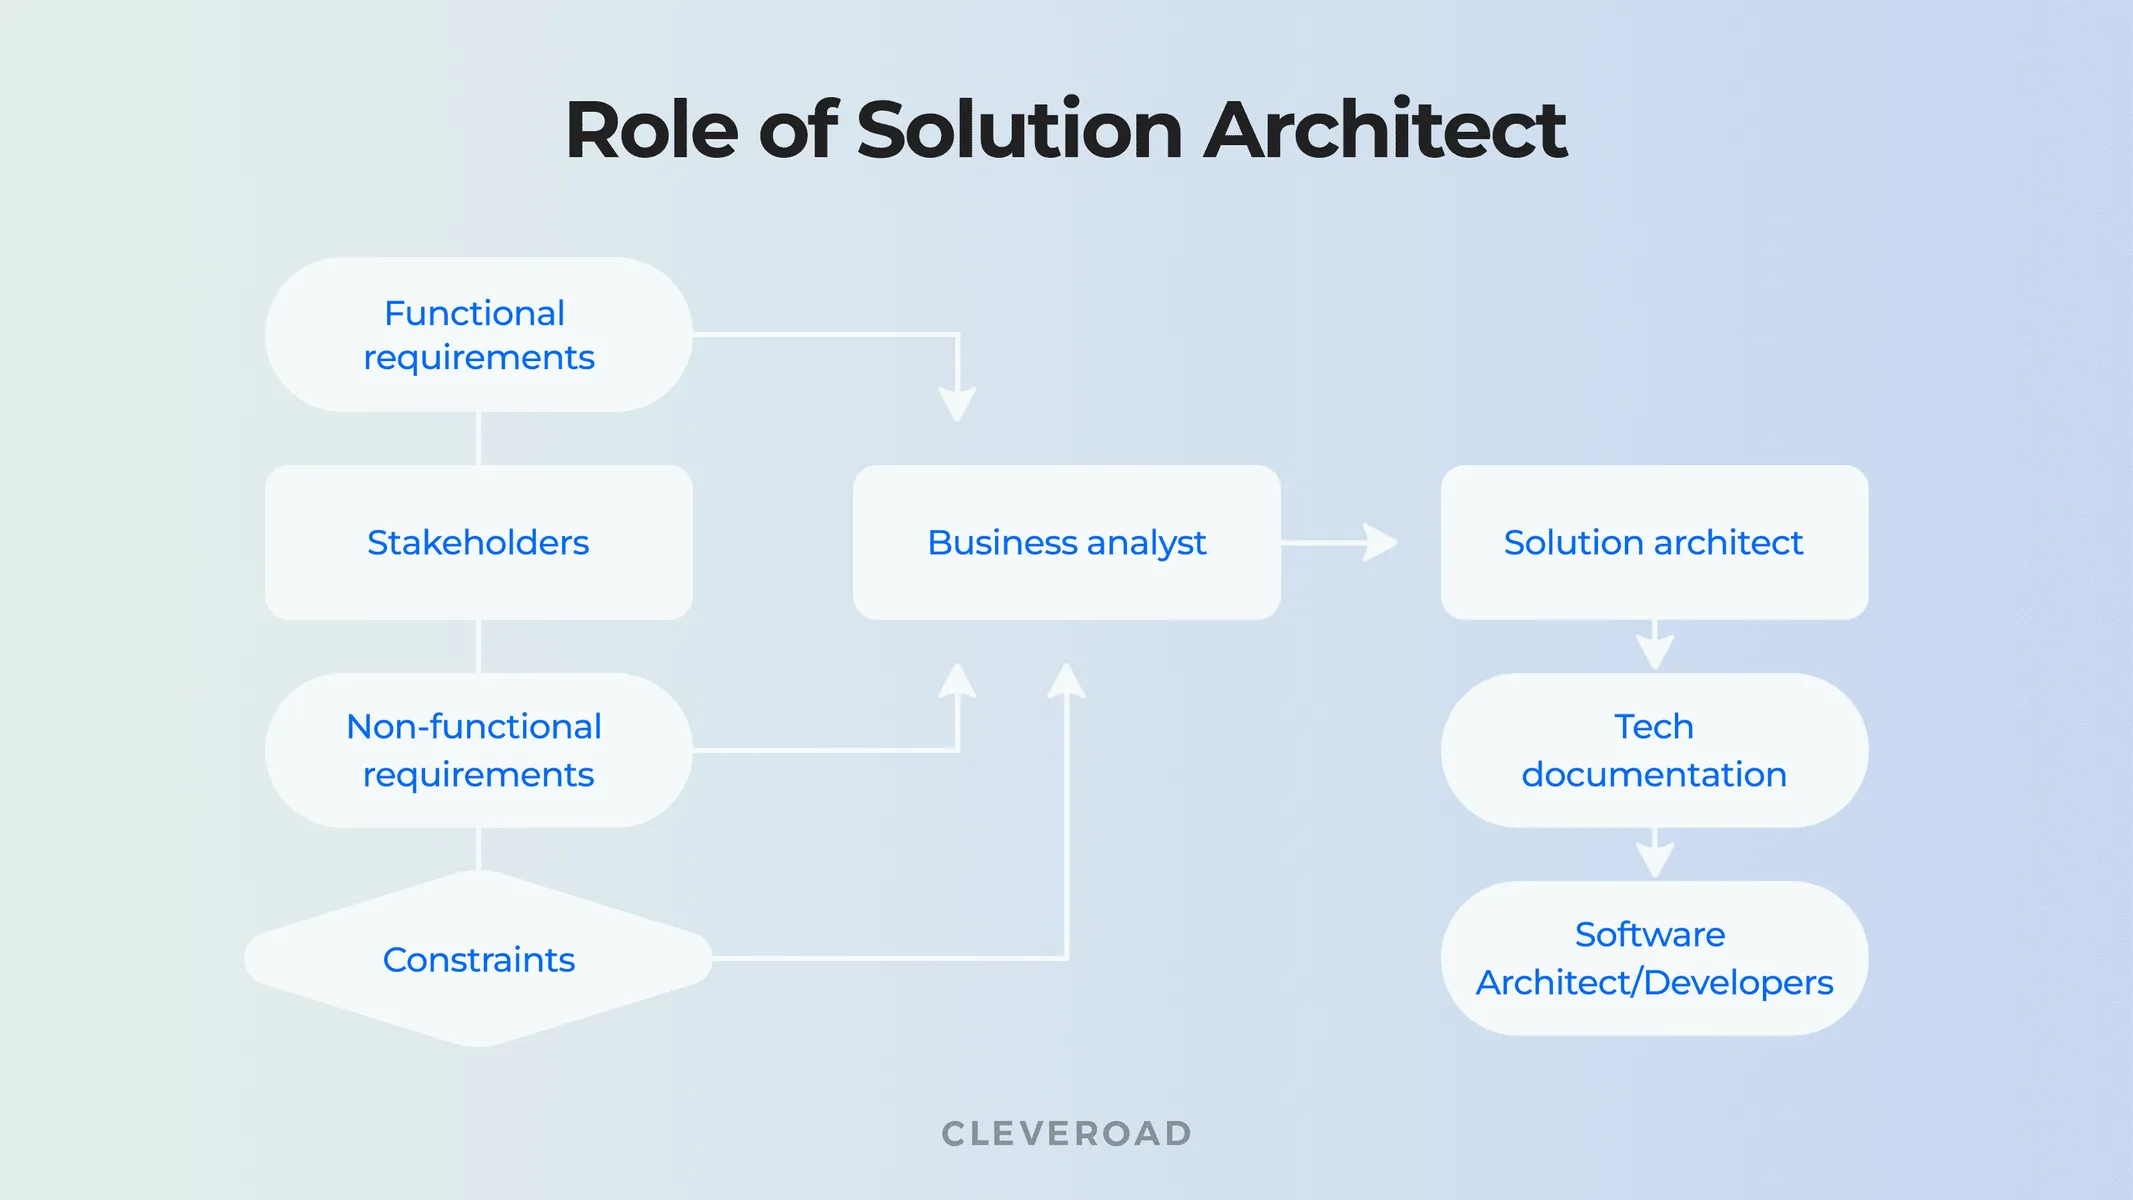 Solution architects role